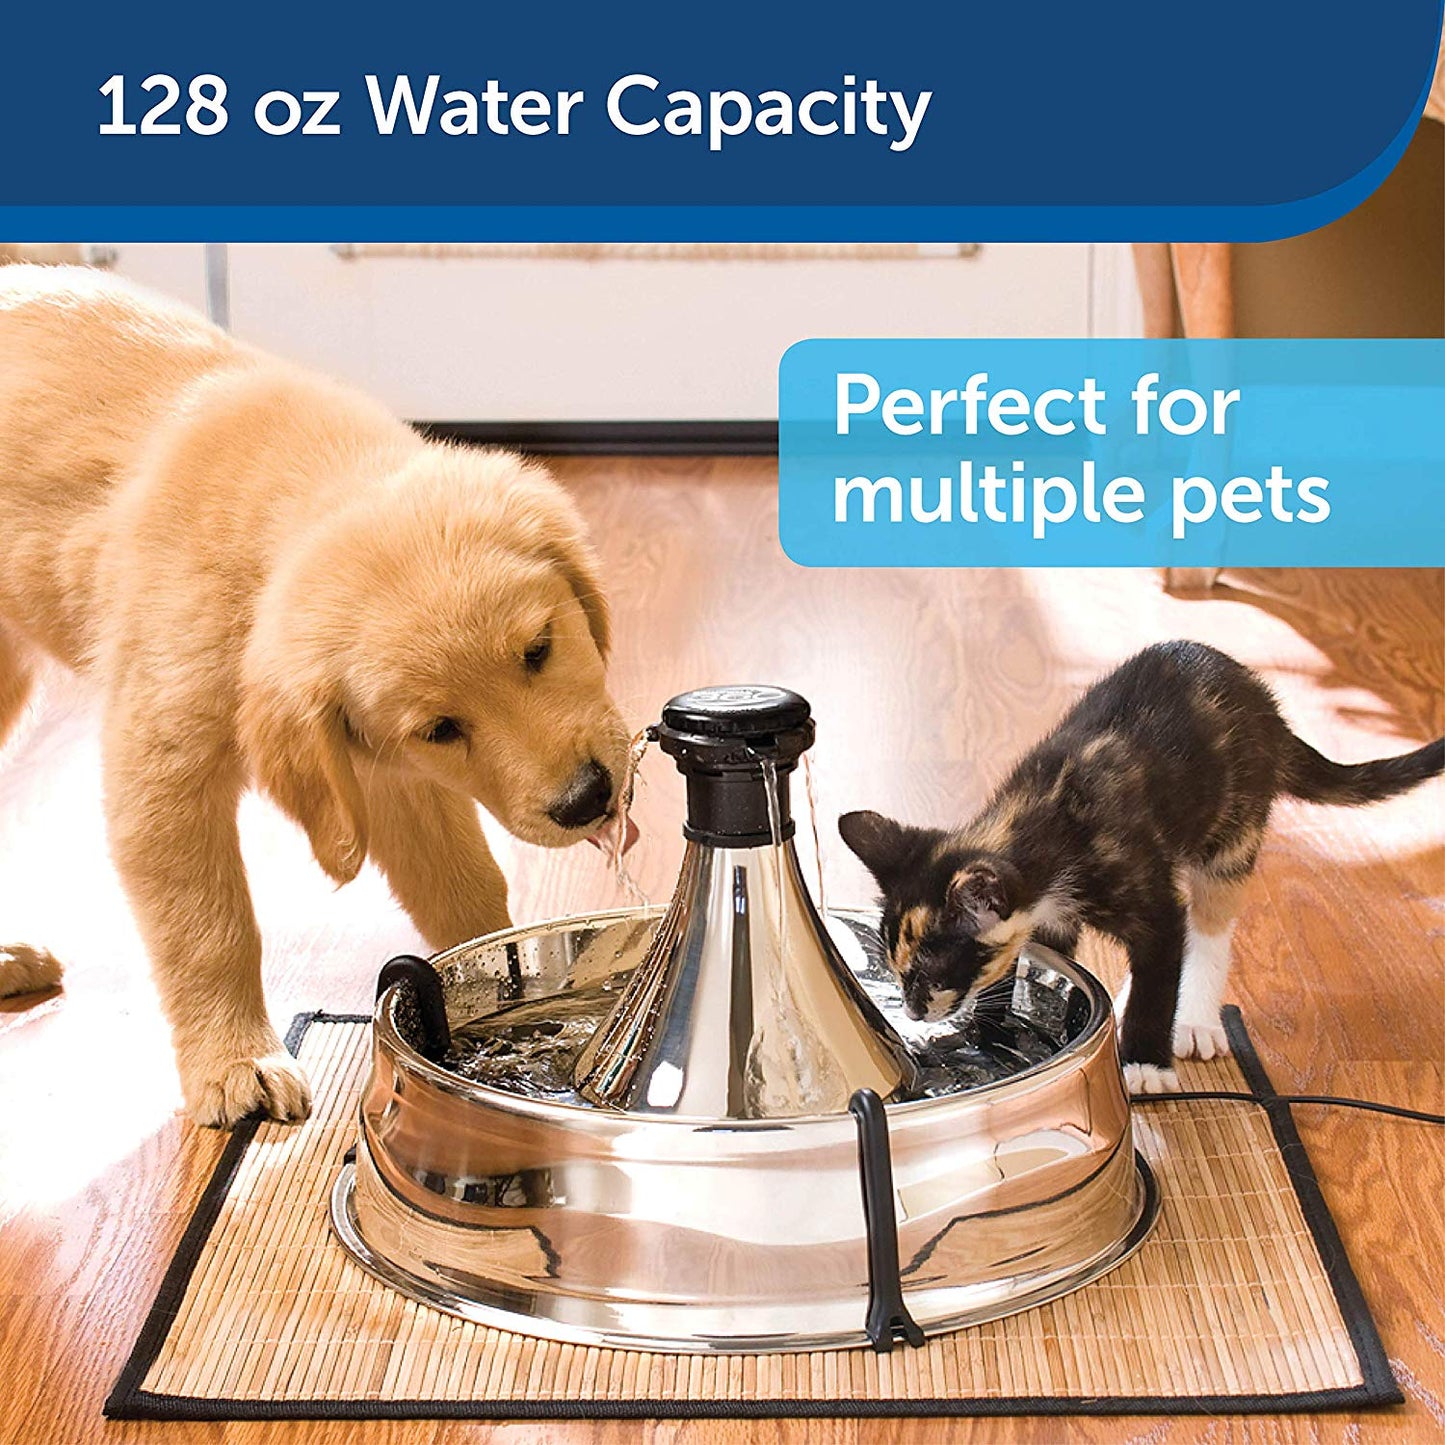 360 Degree Stainless Steel Pet Fountain by PetSafe Drinkwell